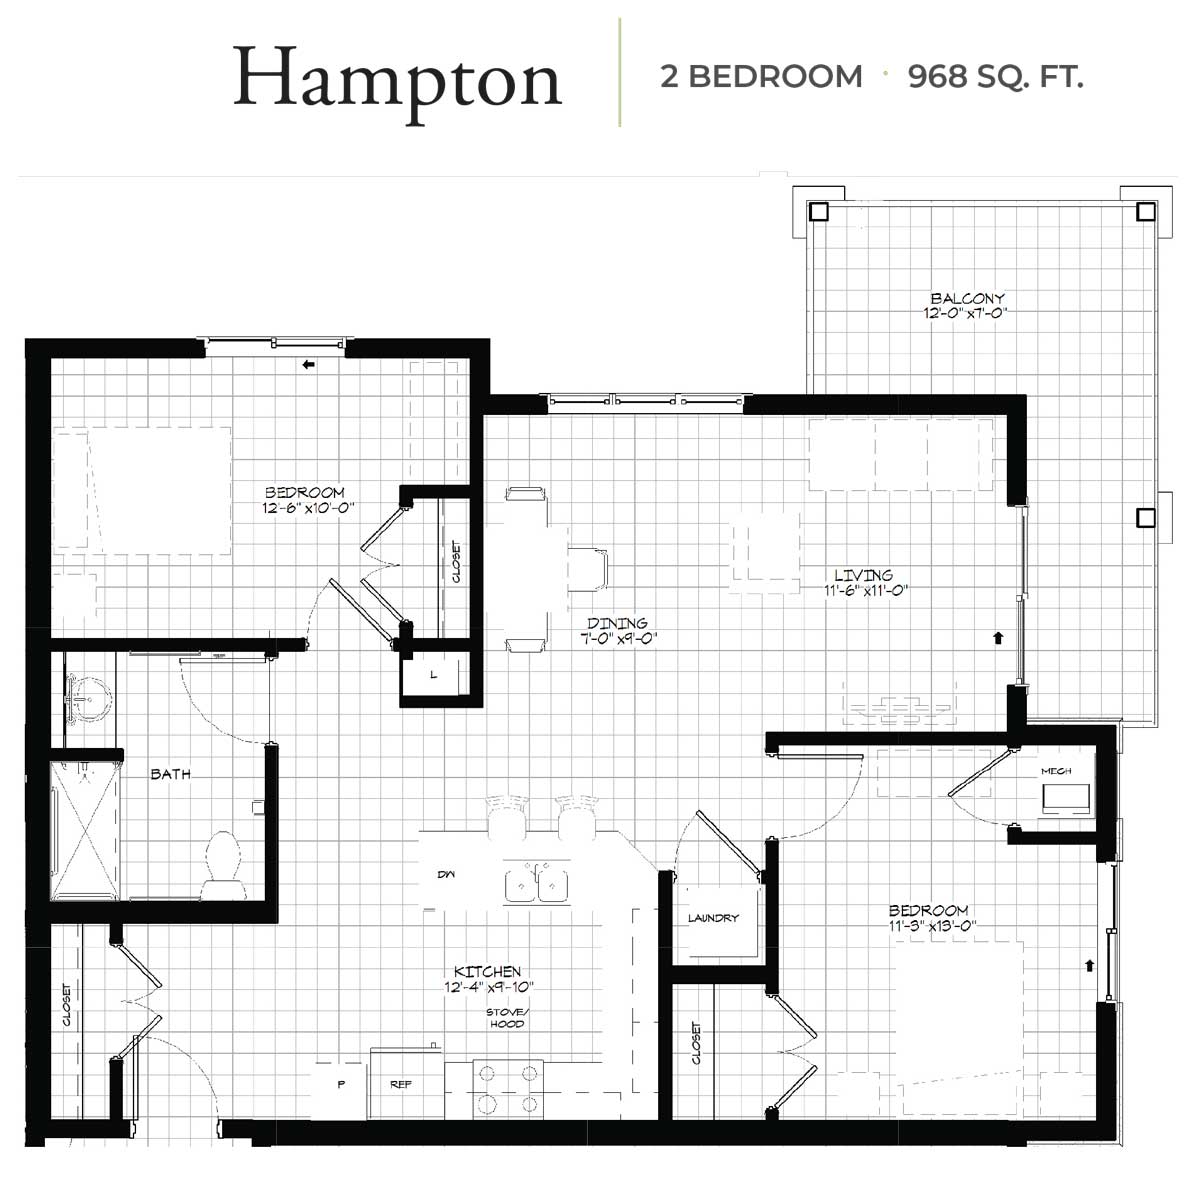 Detailed floor plan of a two-bedroom, 968 square foot apartment unit named Hampton with a balcony.